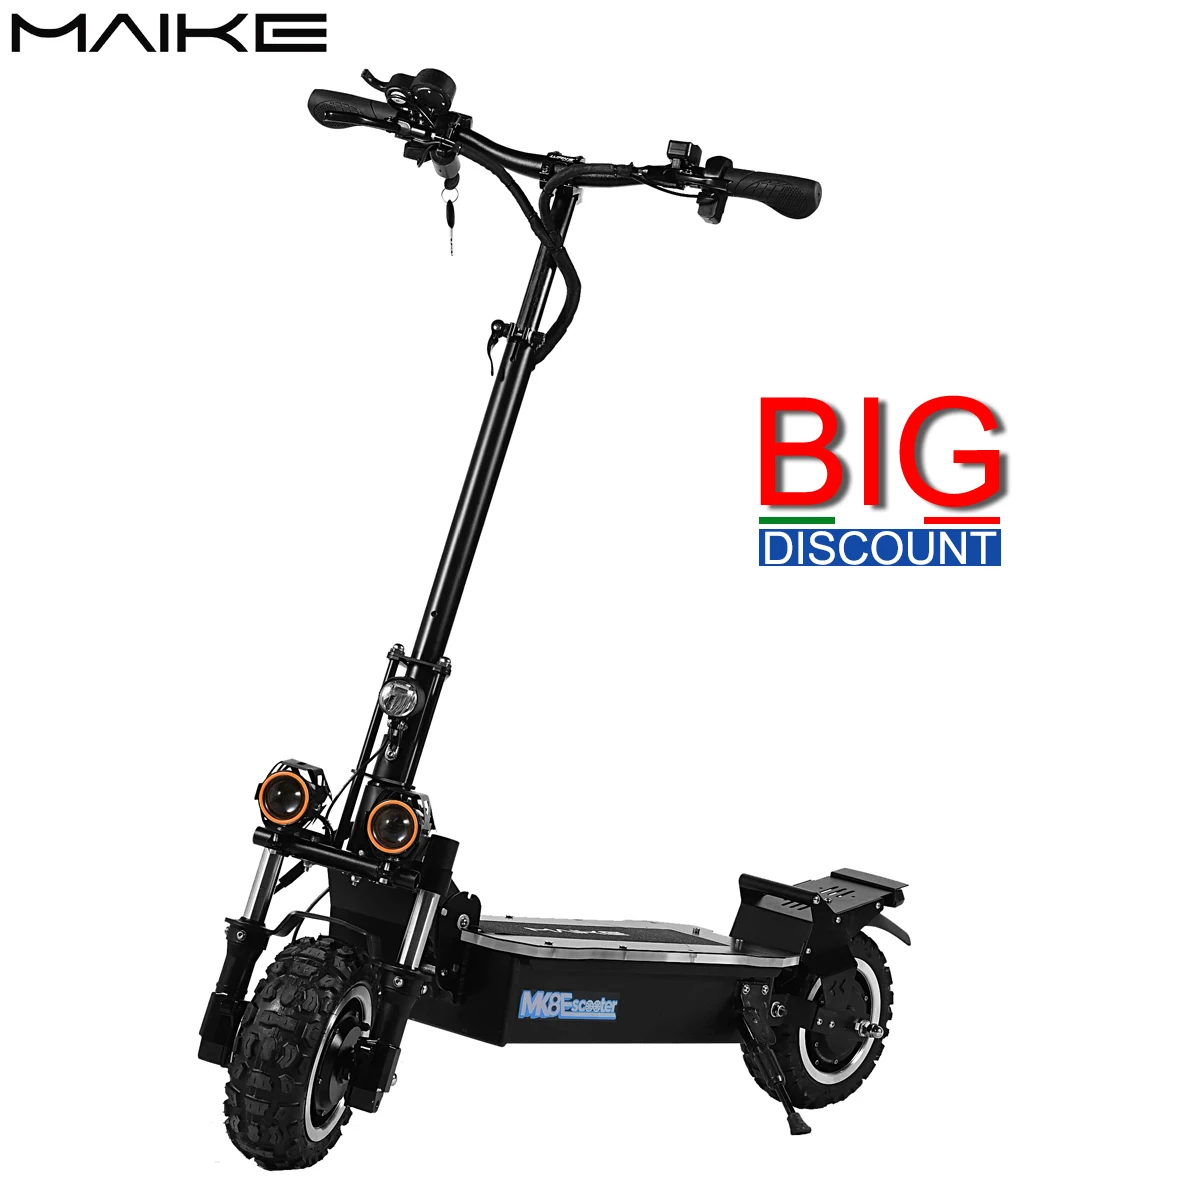 

Hot maike mk8 11 inch 5000w powerful dual motor citycoco e scooter china price off road electric motorcycle scooter adult